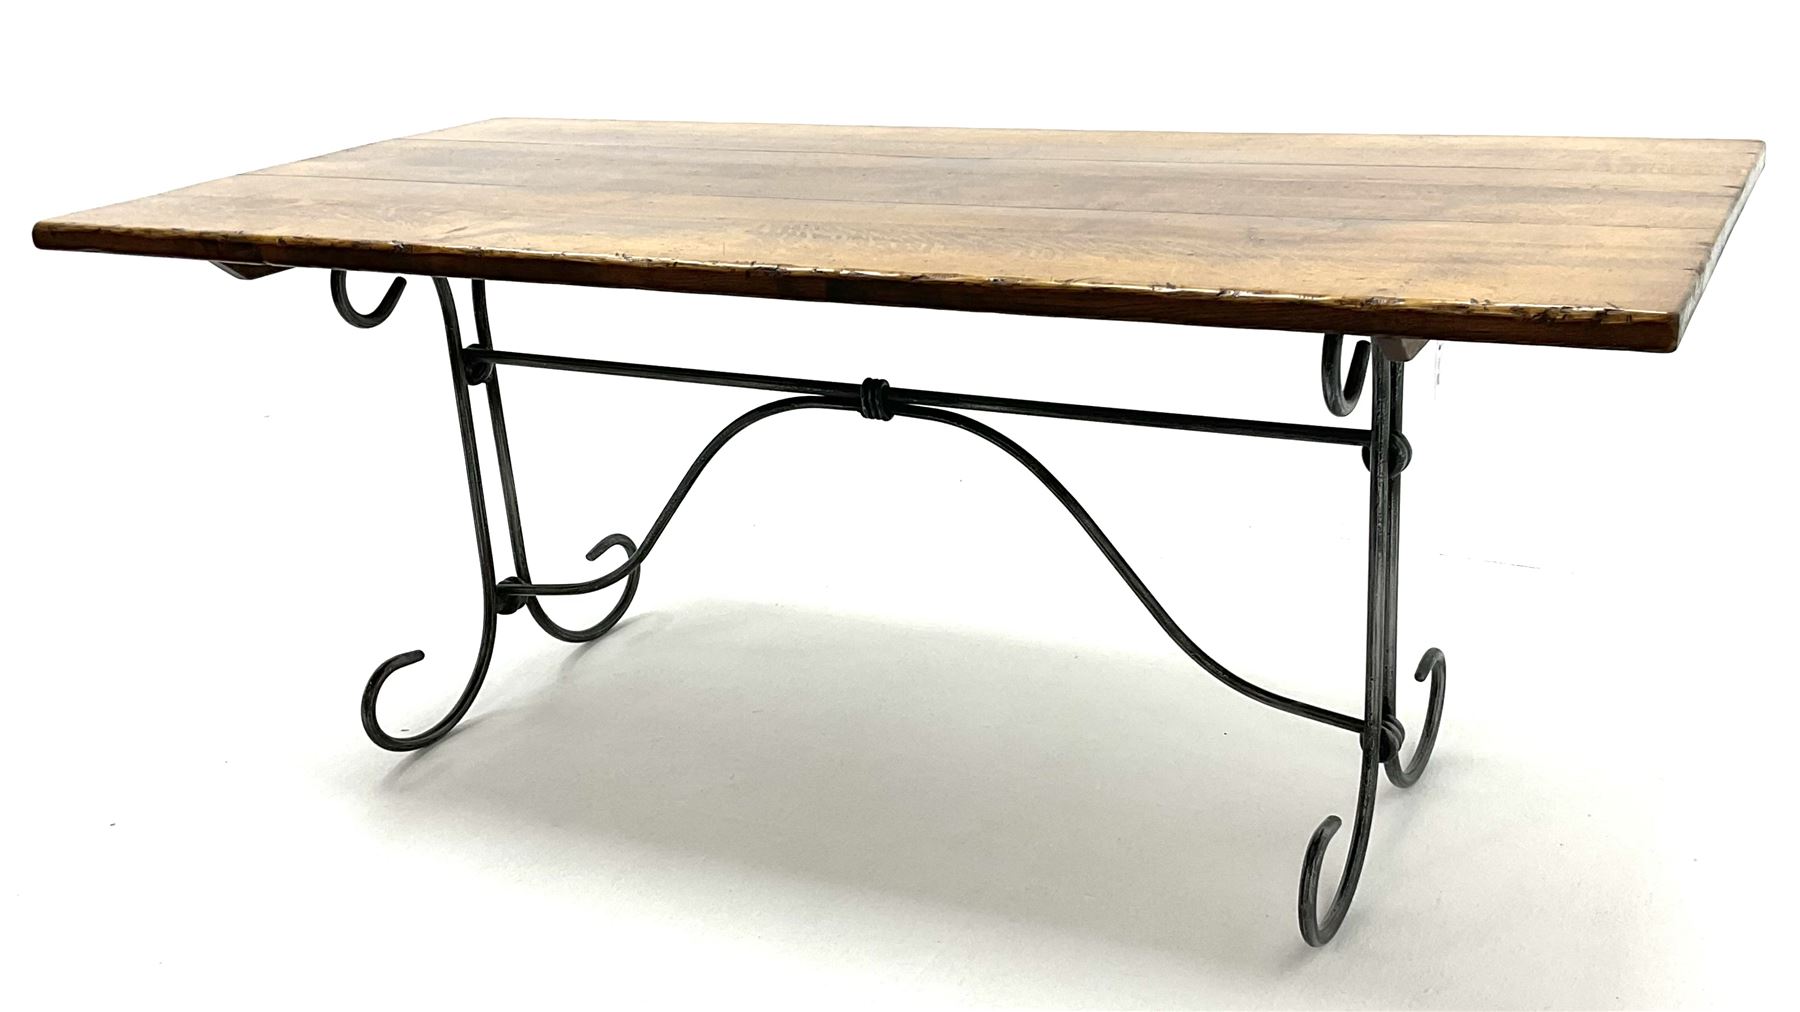 Contemporary oak and wrought metal table - Image 3 of 4